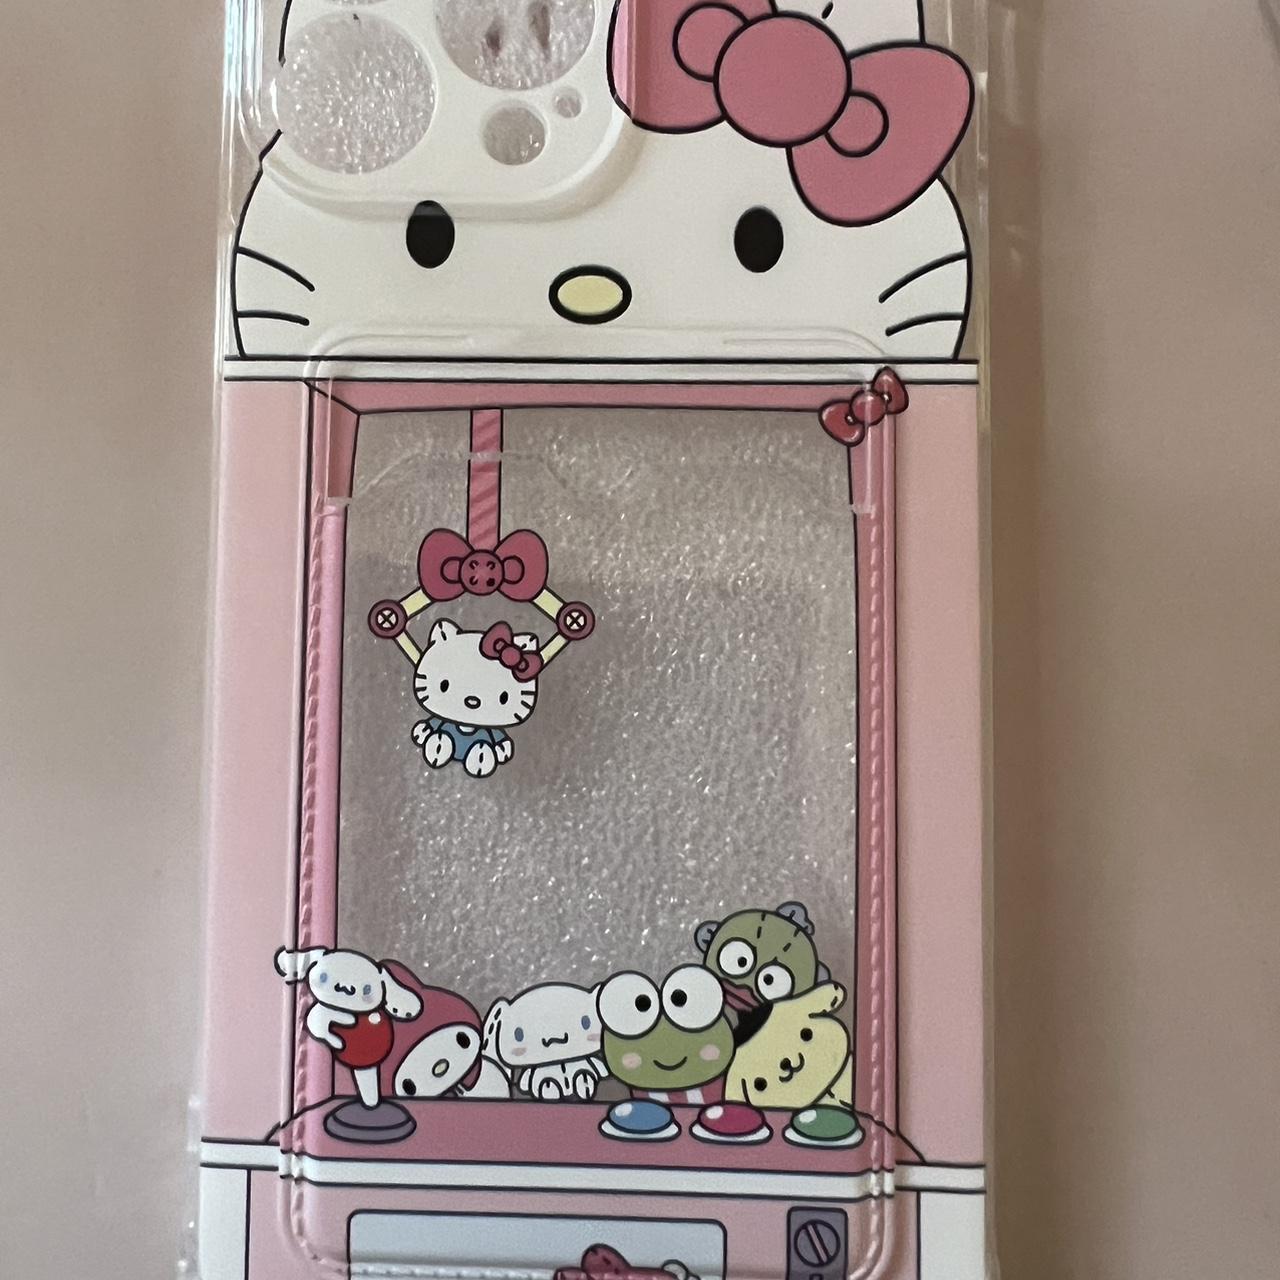 Hello kitty phone case for iPhone 13 Pro Max - Depop